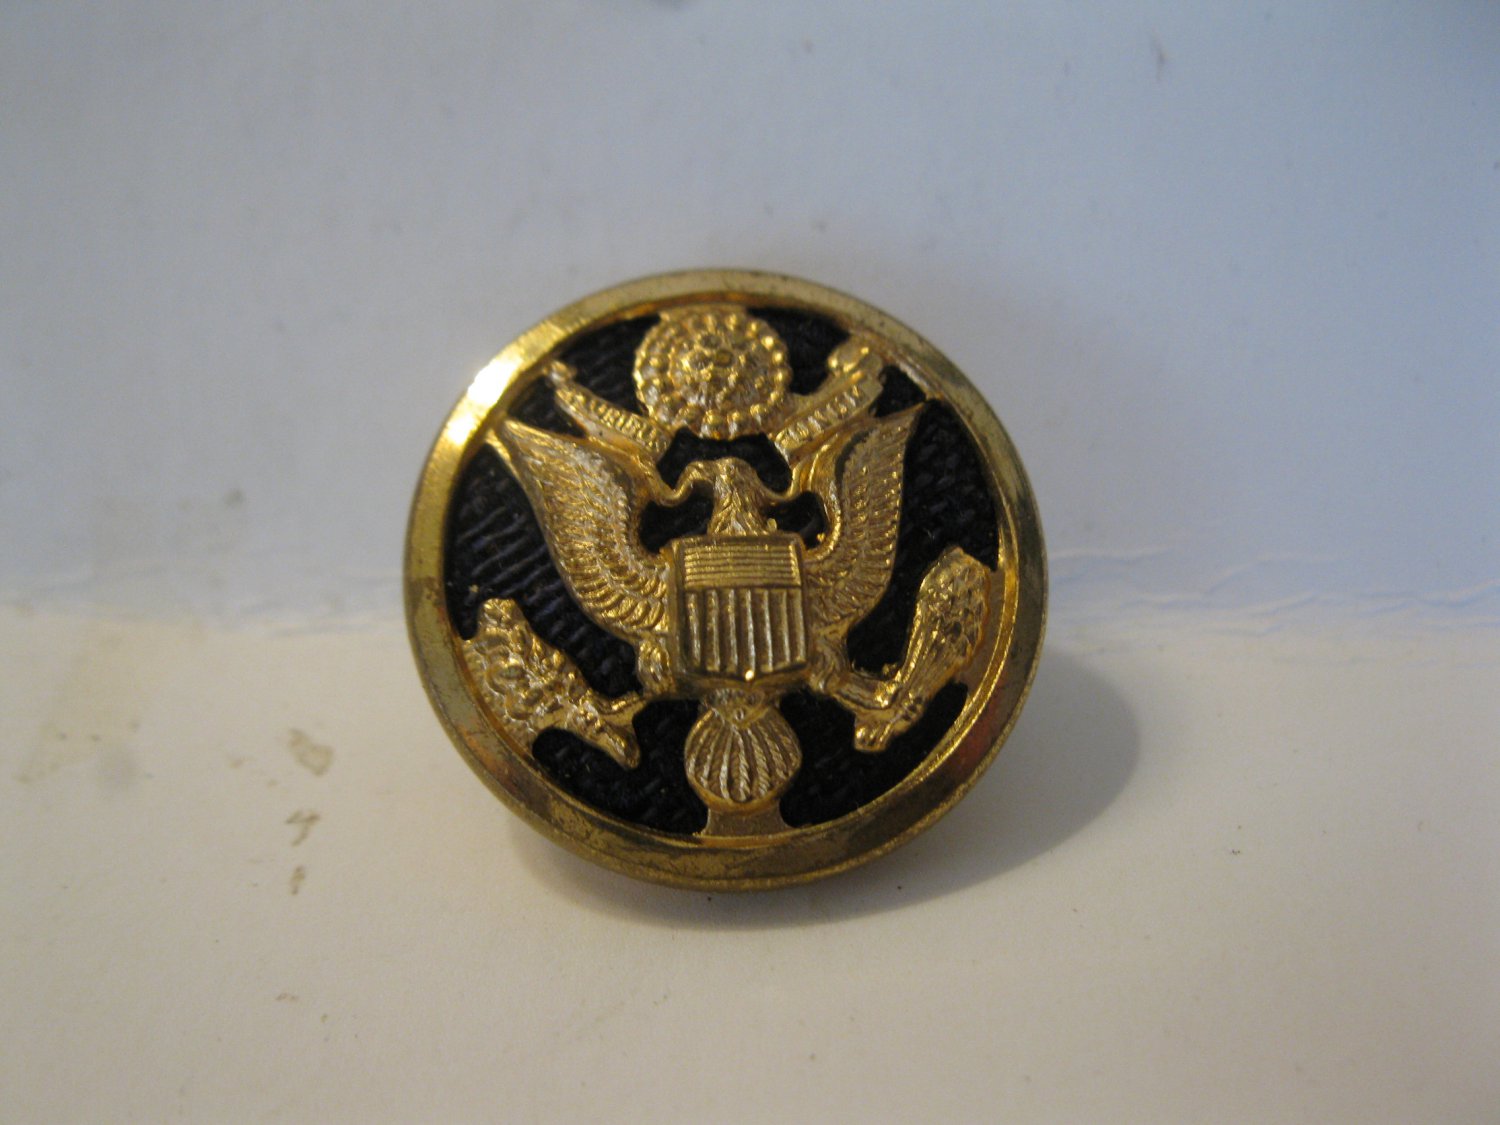 (BX-1) Vintage 1" round Great Seal Military Button, Superior Quality, England - Gold / Velvet